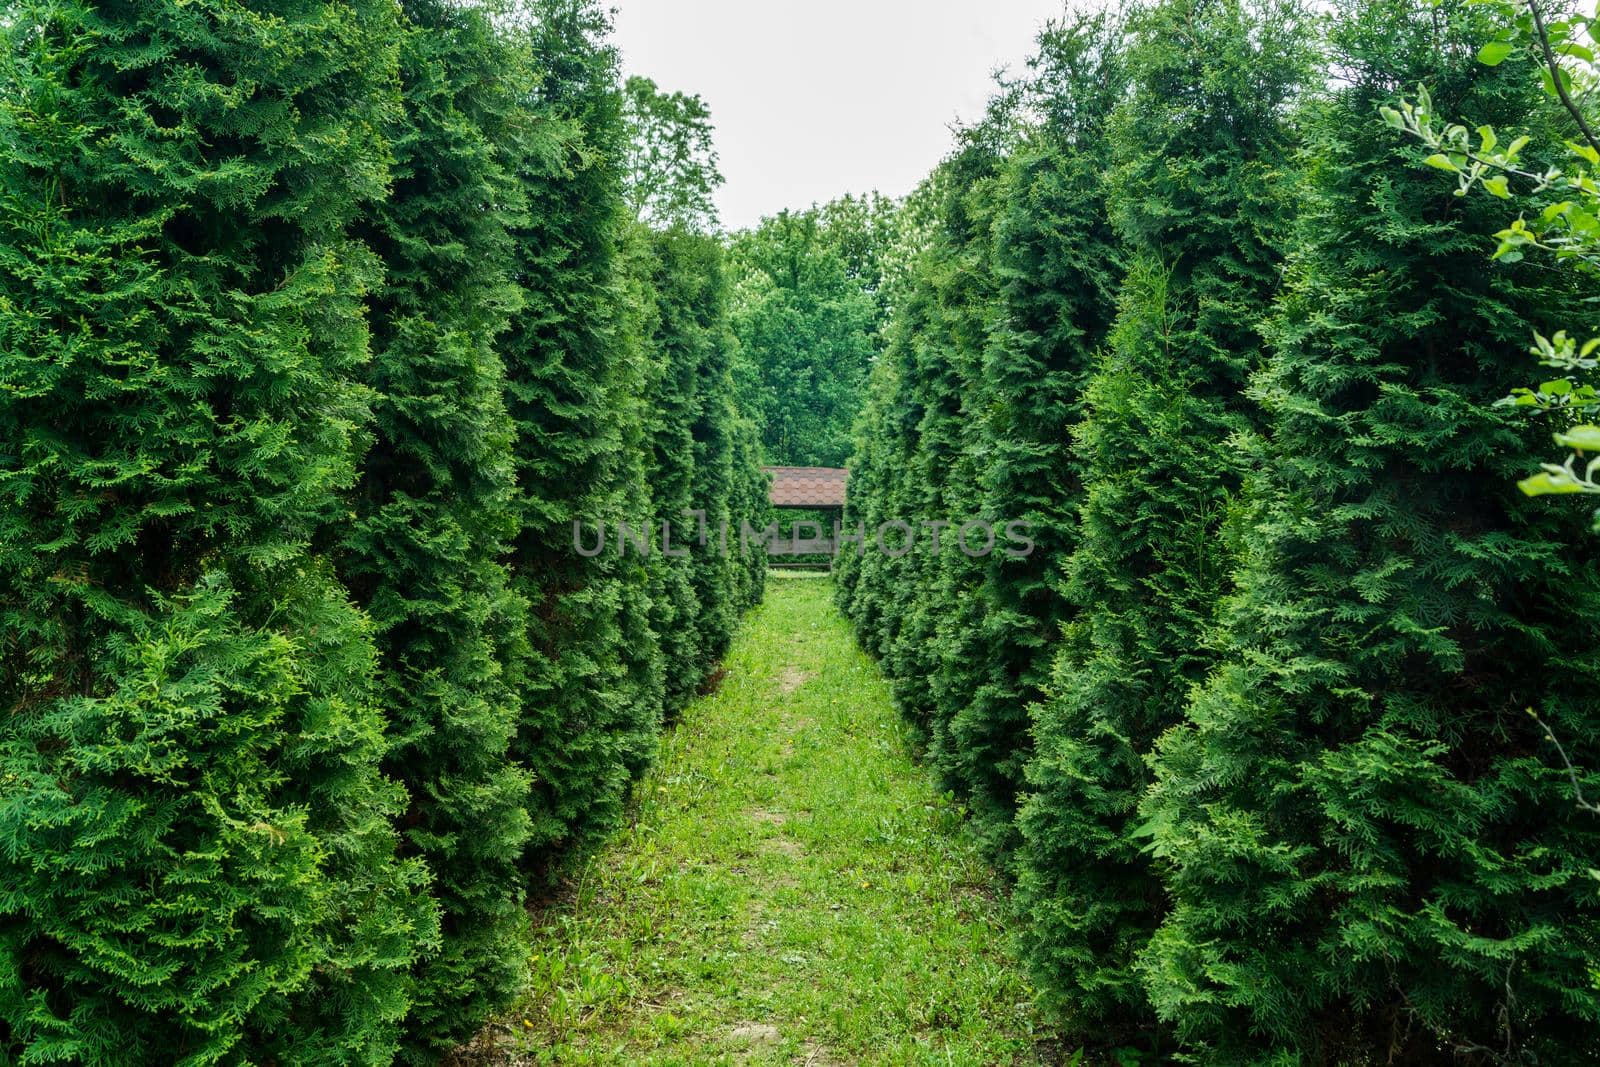 The alley in the park is lined with green thuja on both sides by Serhii_Voroshchuk